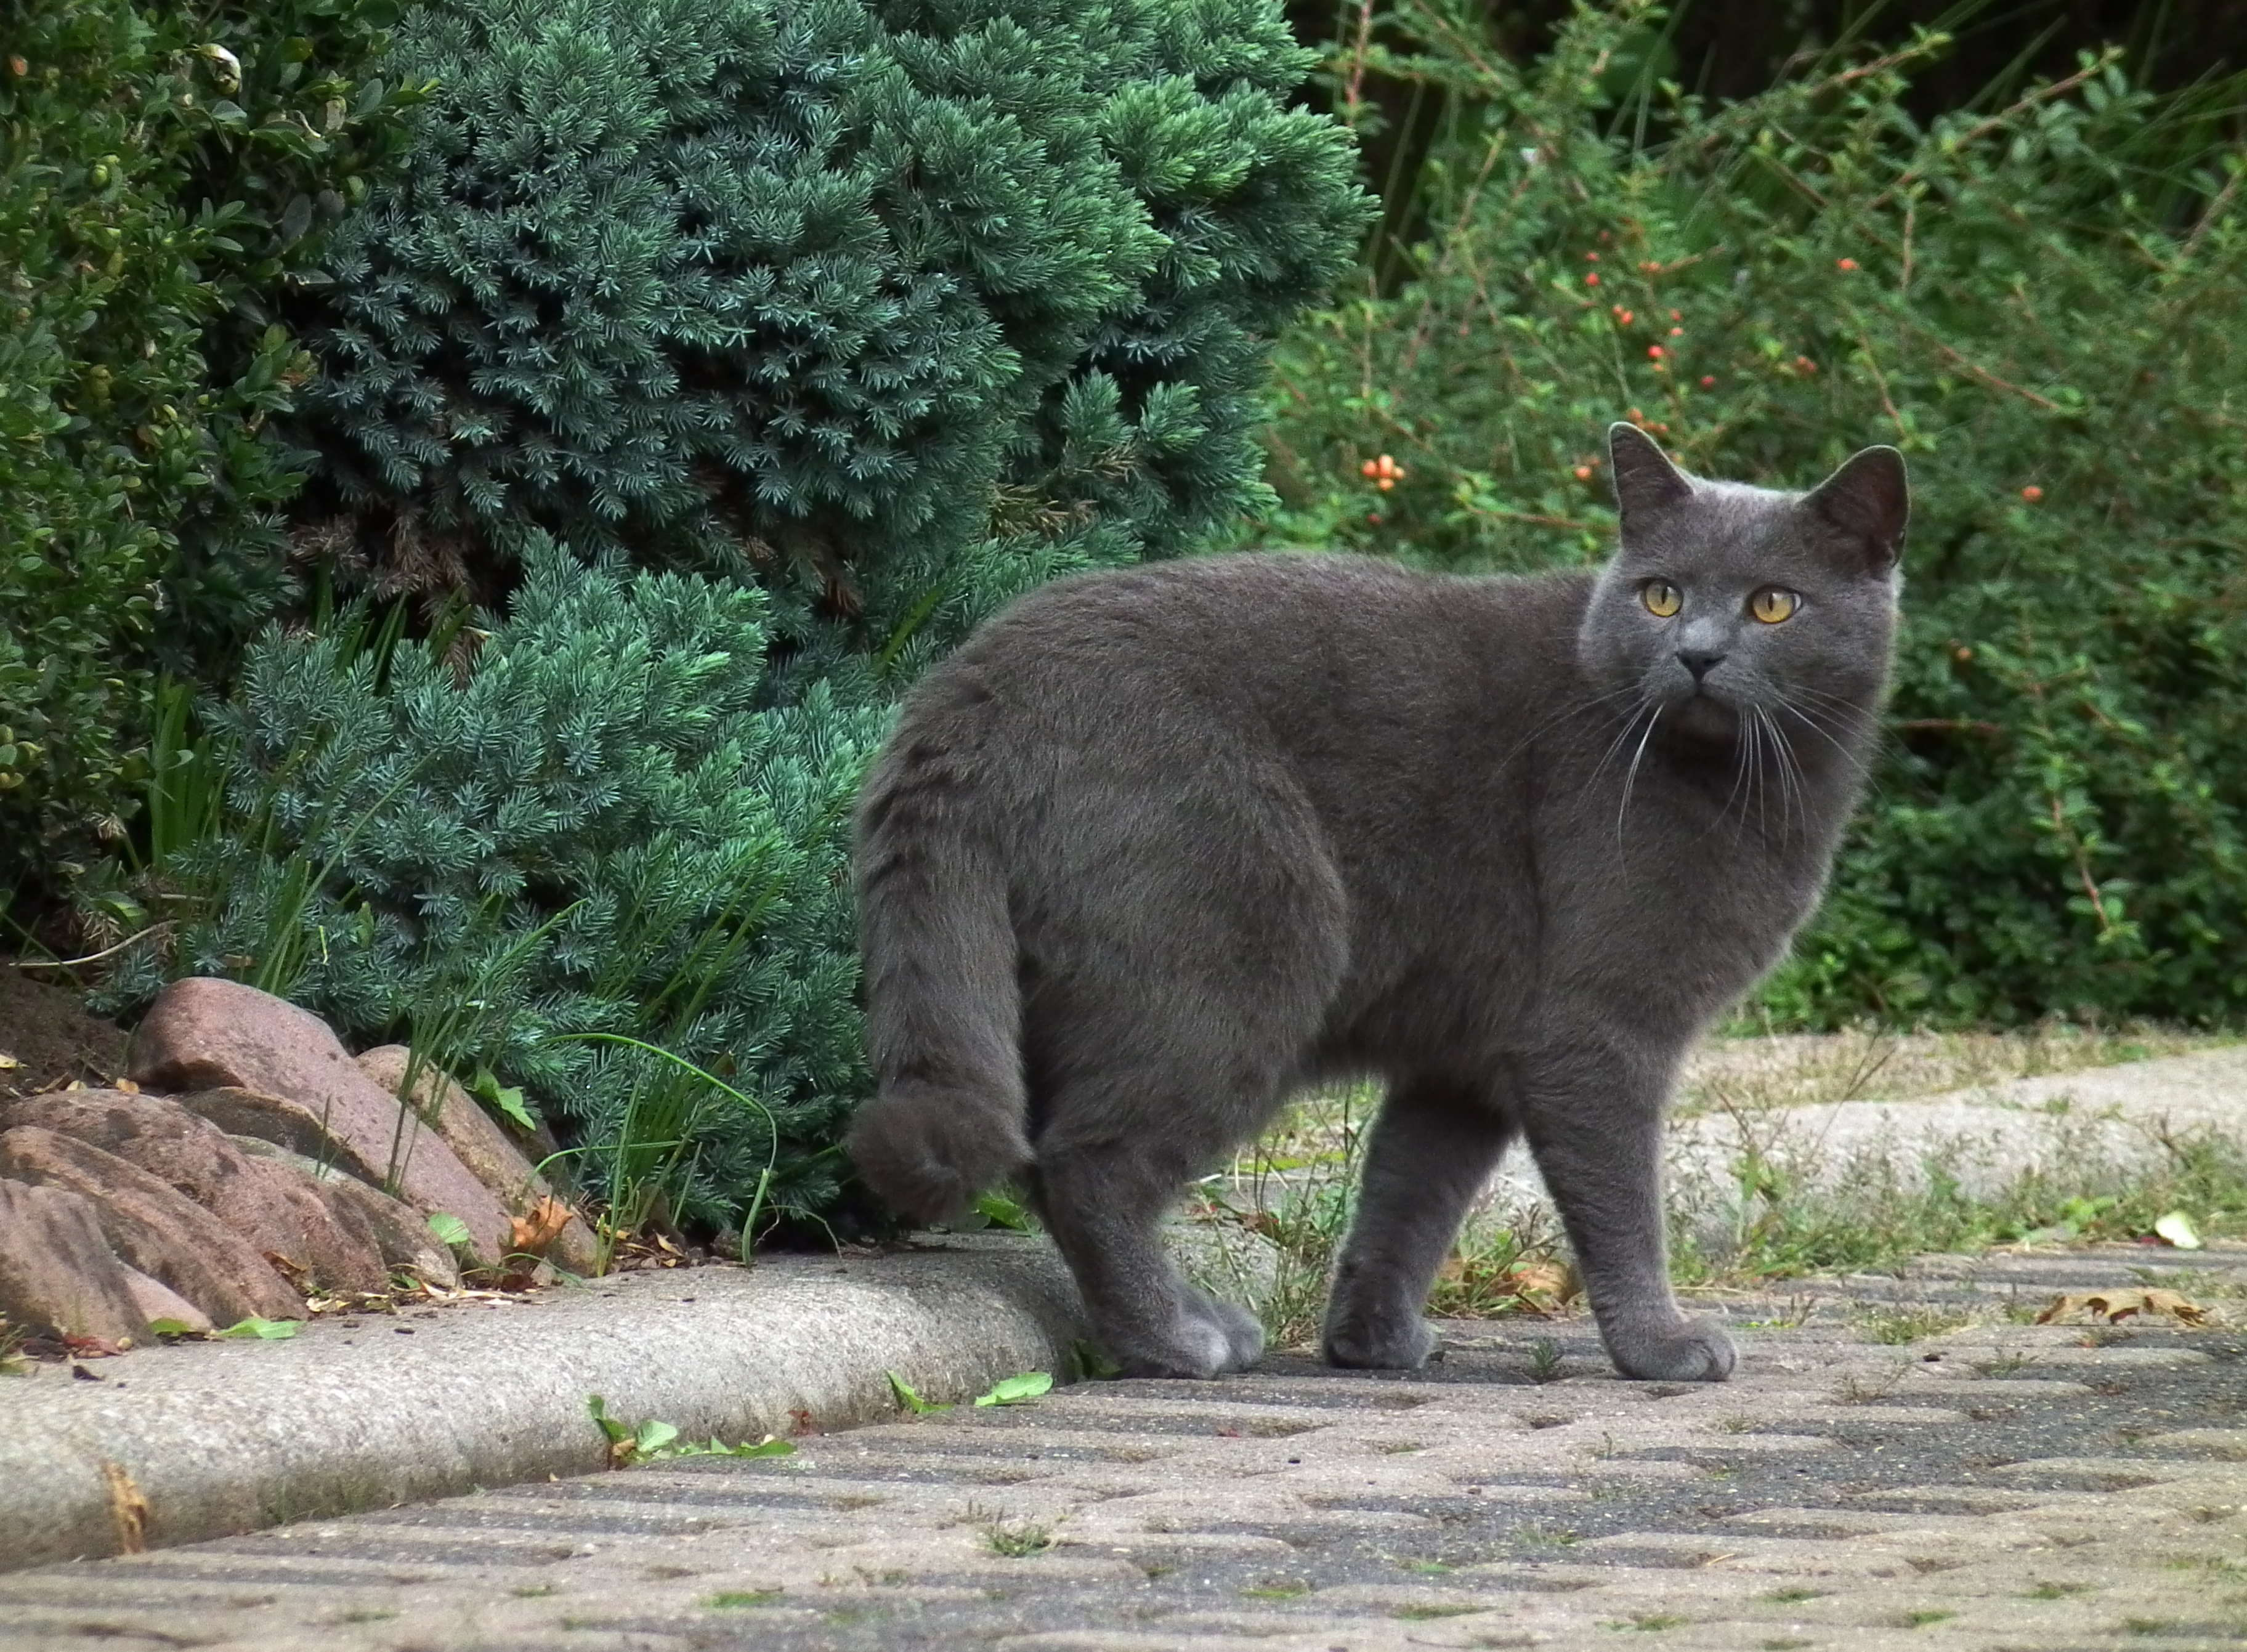 The gray cat looked back